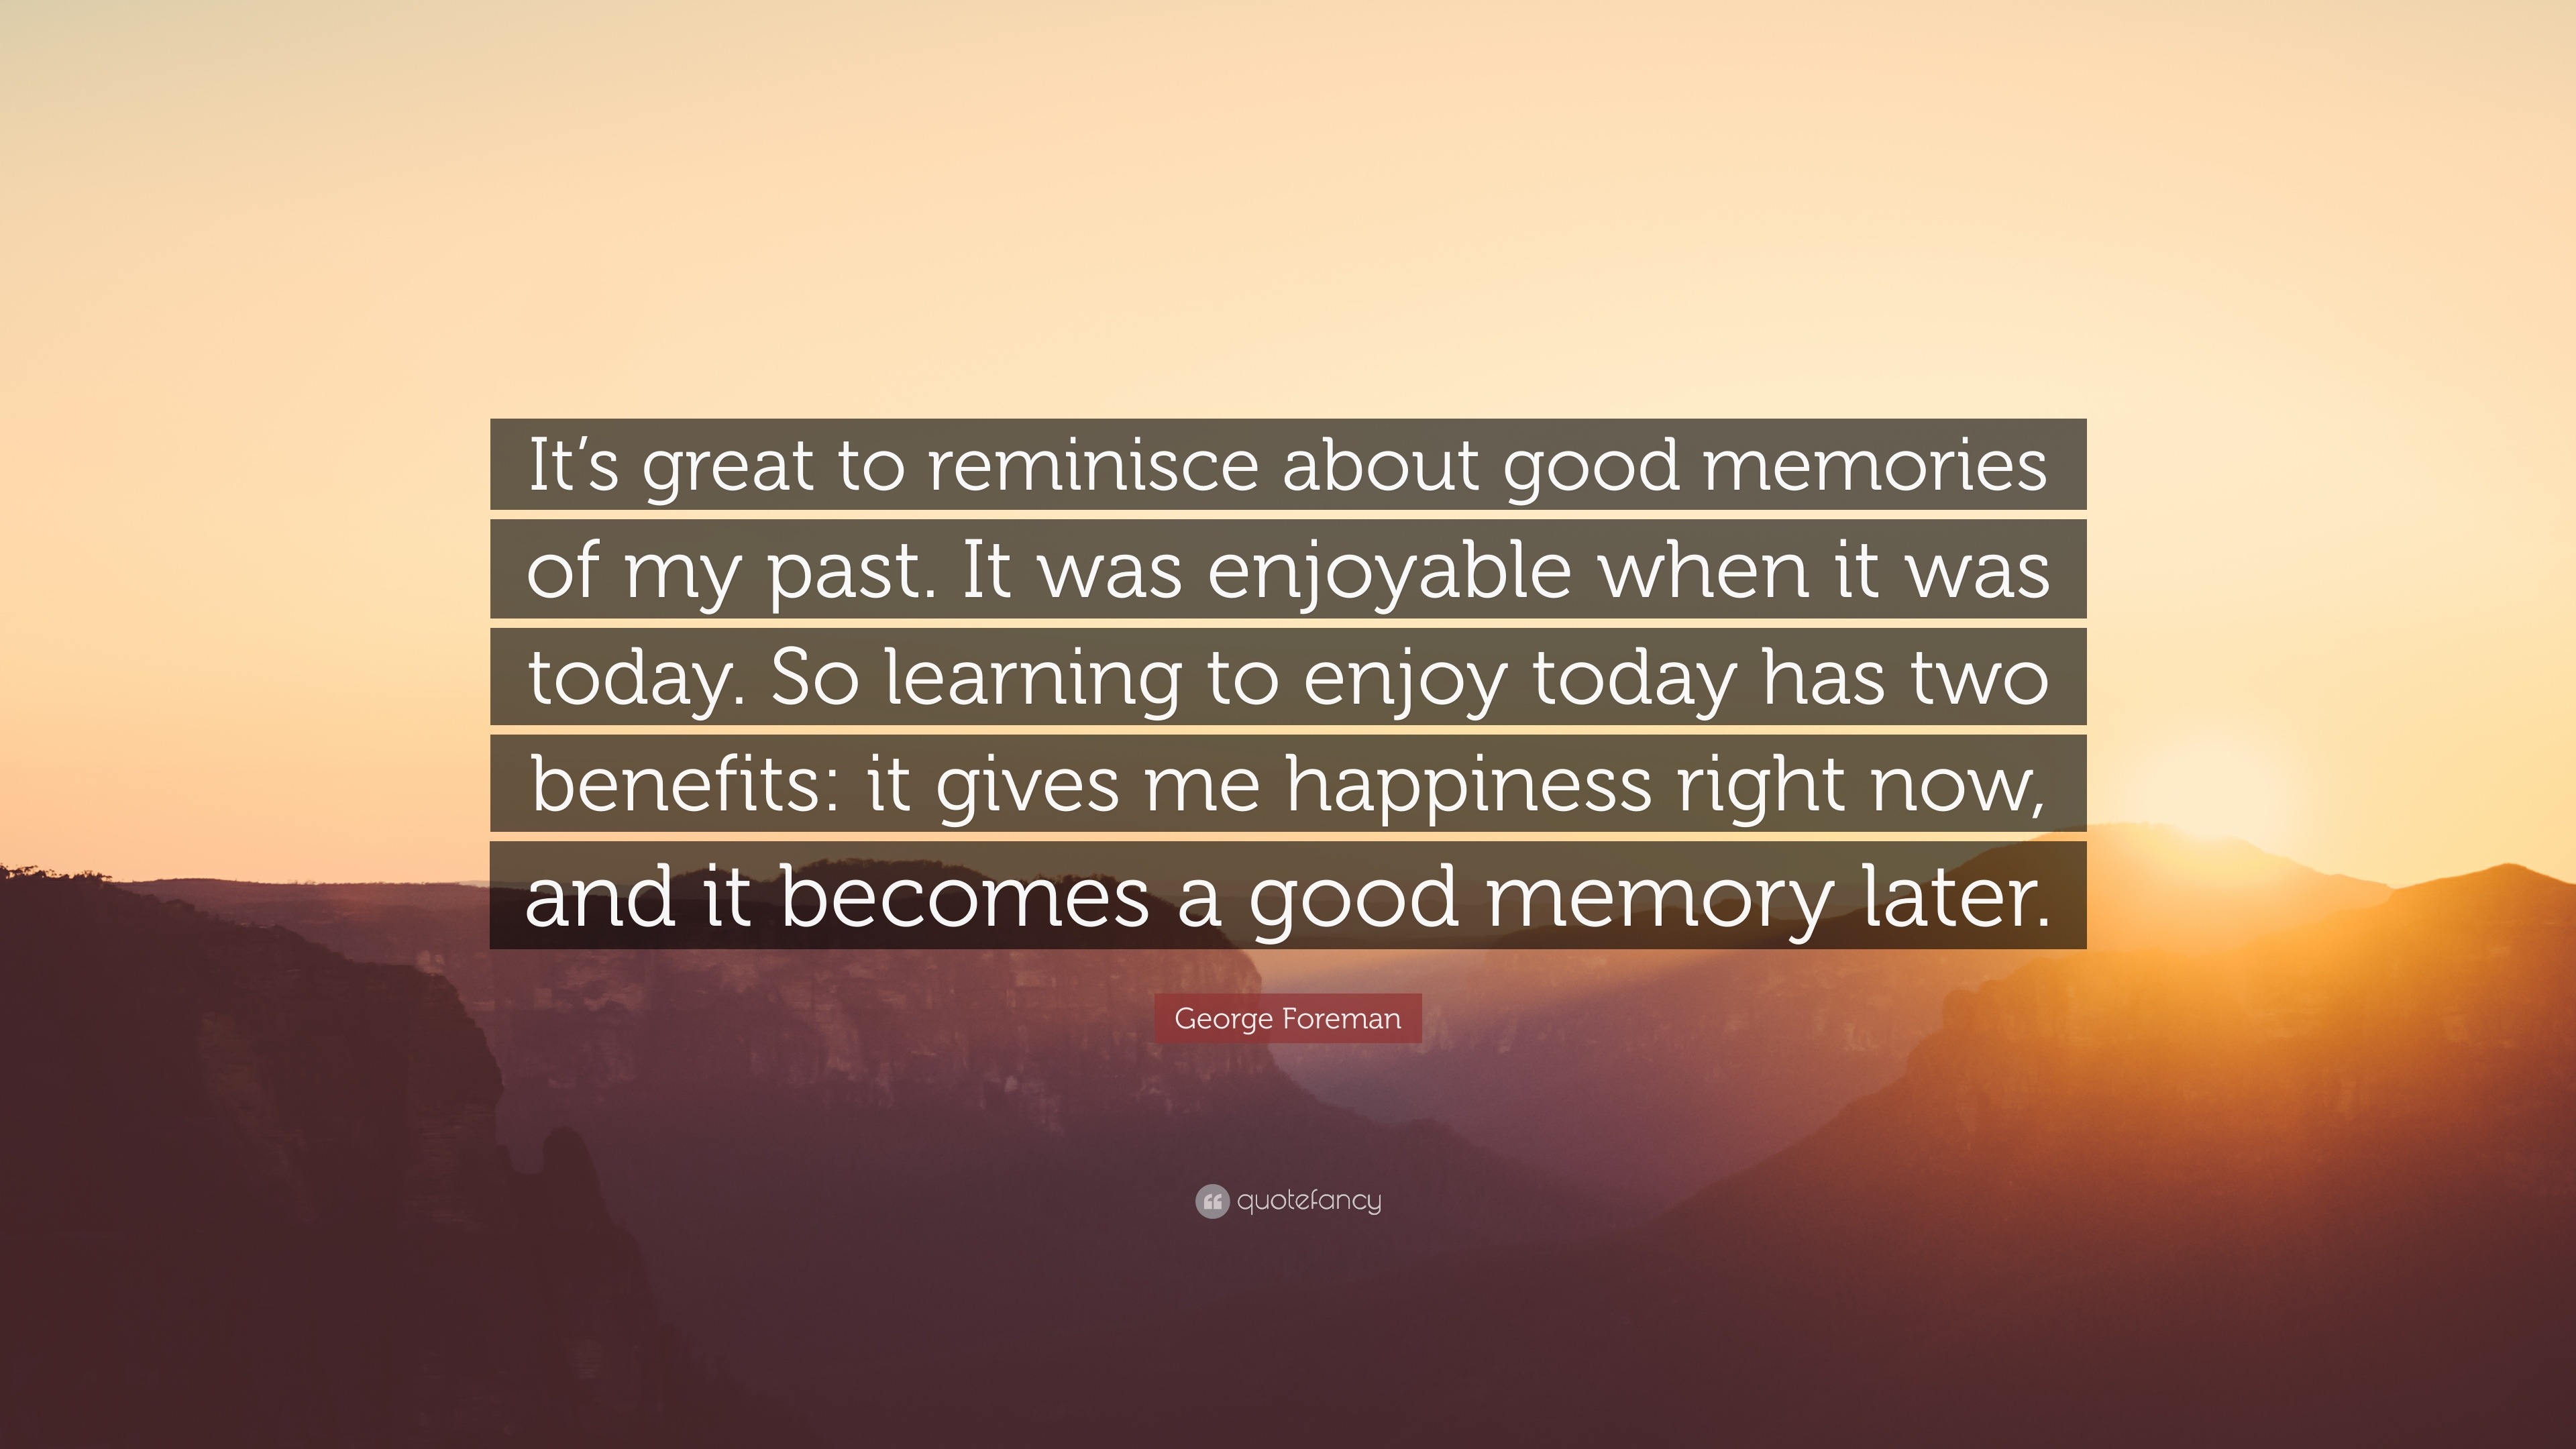 George Foreman Quote: “It’s great to reminisce about good memories of